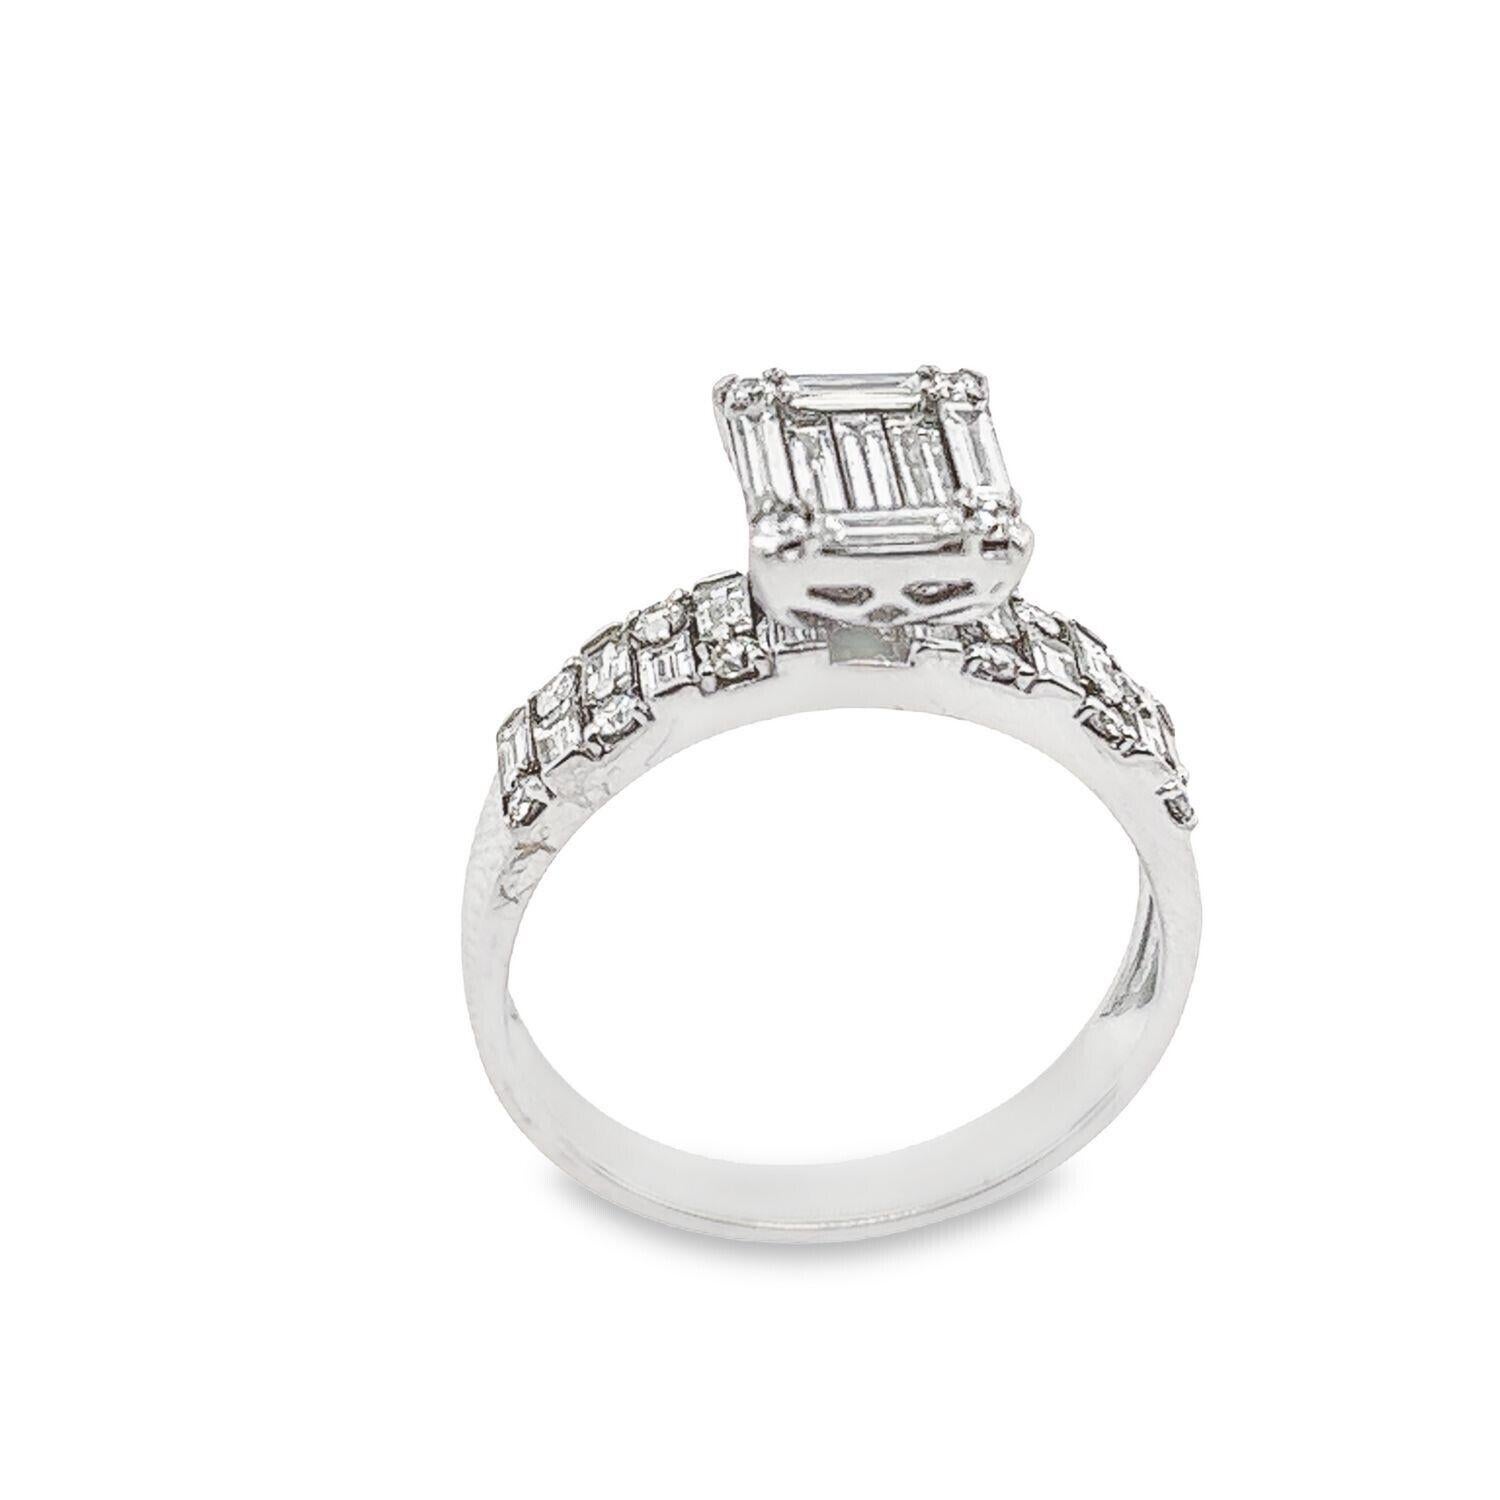 Baguette Cut Bridal Set Engagement Ring 1ct + 0.55ct Wedding Ring in 18ct White Gold For Sale